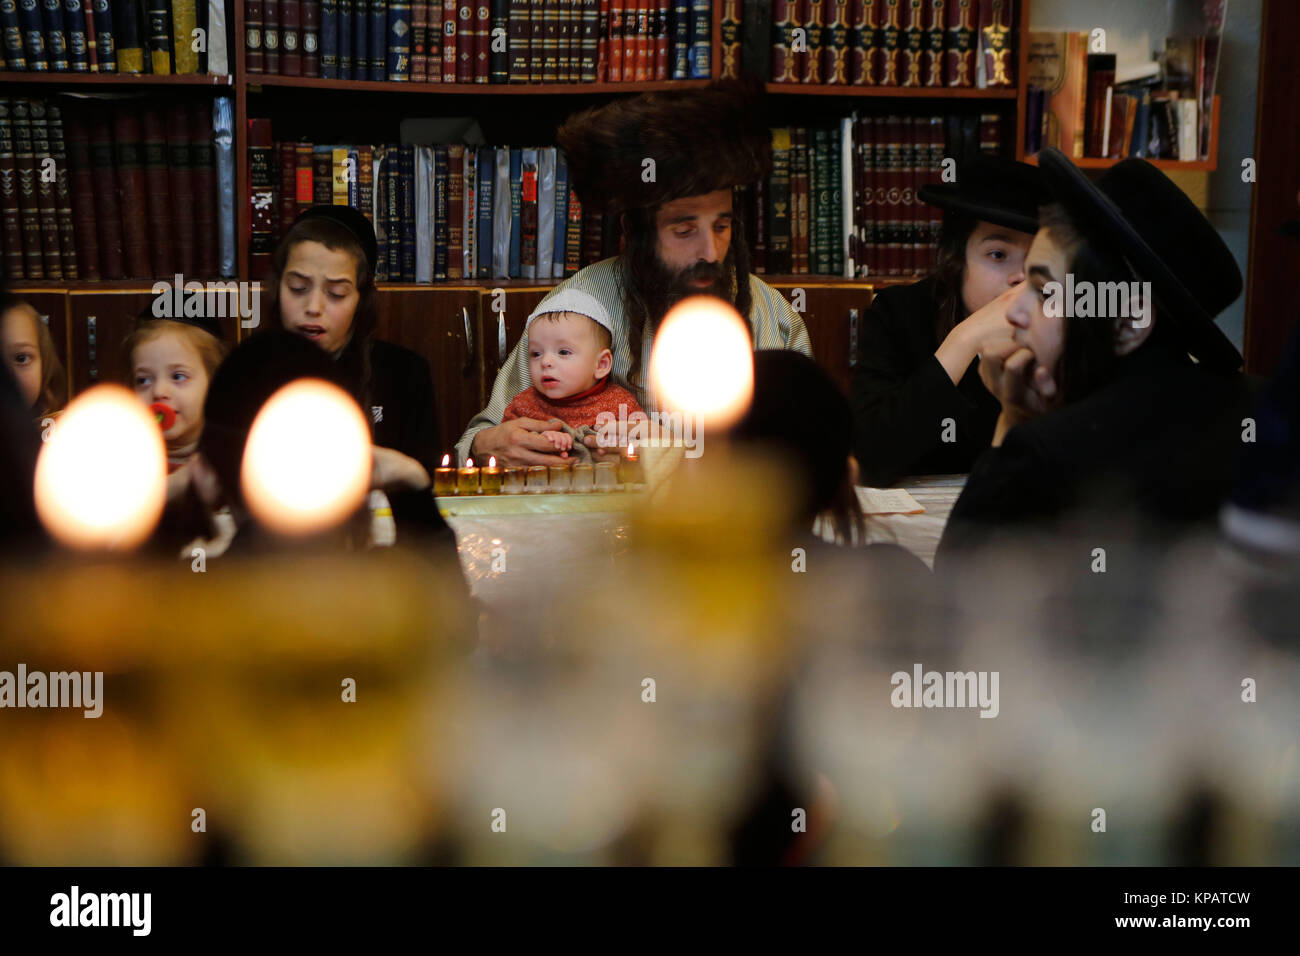 Jerusalem. 14th Dec, 2017. Ultra-Orthodox Jews gather during Hanukkah in Mea Shearim neighborhood in Jerusalem, on Dec. 14, 2017. Hanukkah, also known as the Festival of Lights and Feast of Dedication, is an eight-day Jewish holiday commemorating the rededication of the Holy Temple (the Second Temple) in Jerusalem at the time of the Maccabean Revolt against the Seleucid Empire of the 2nd Century B.C. Credit: Gil Cohen Magen/Xinhua/Alamy Live News Stock Photo